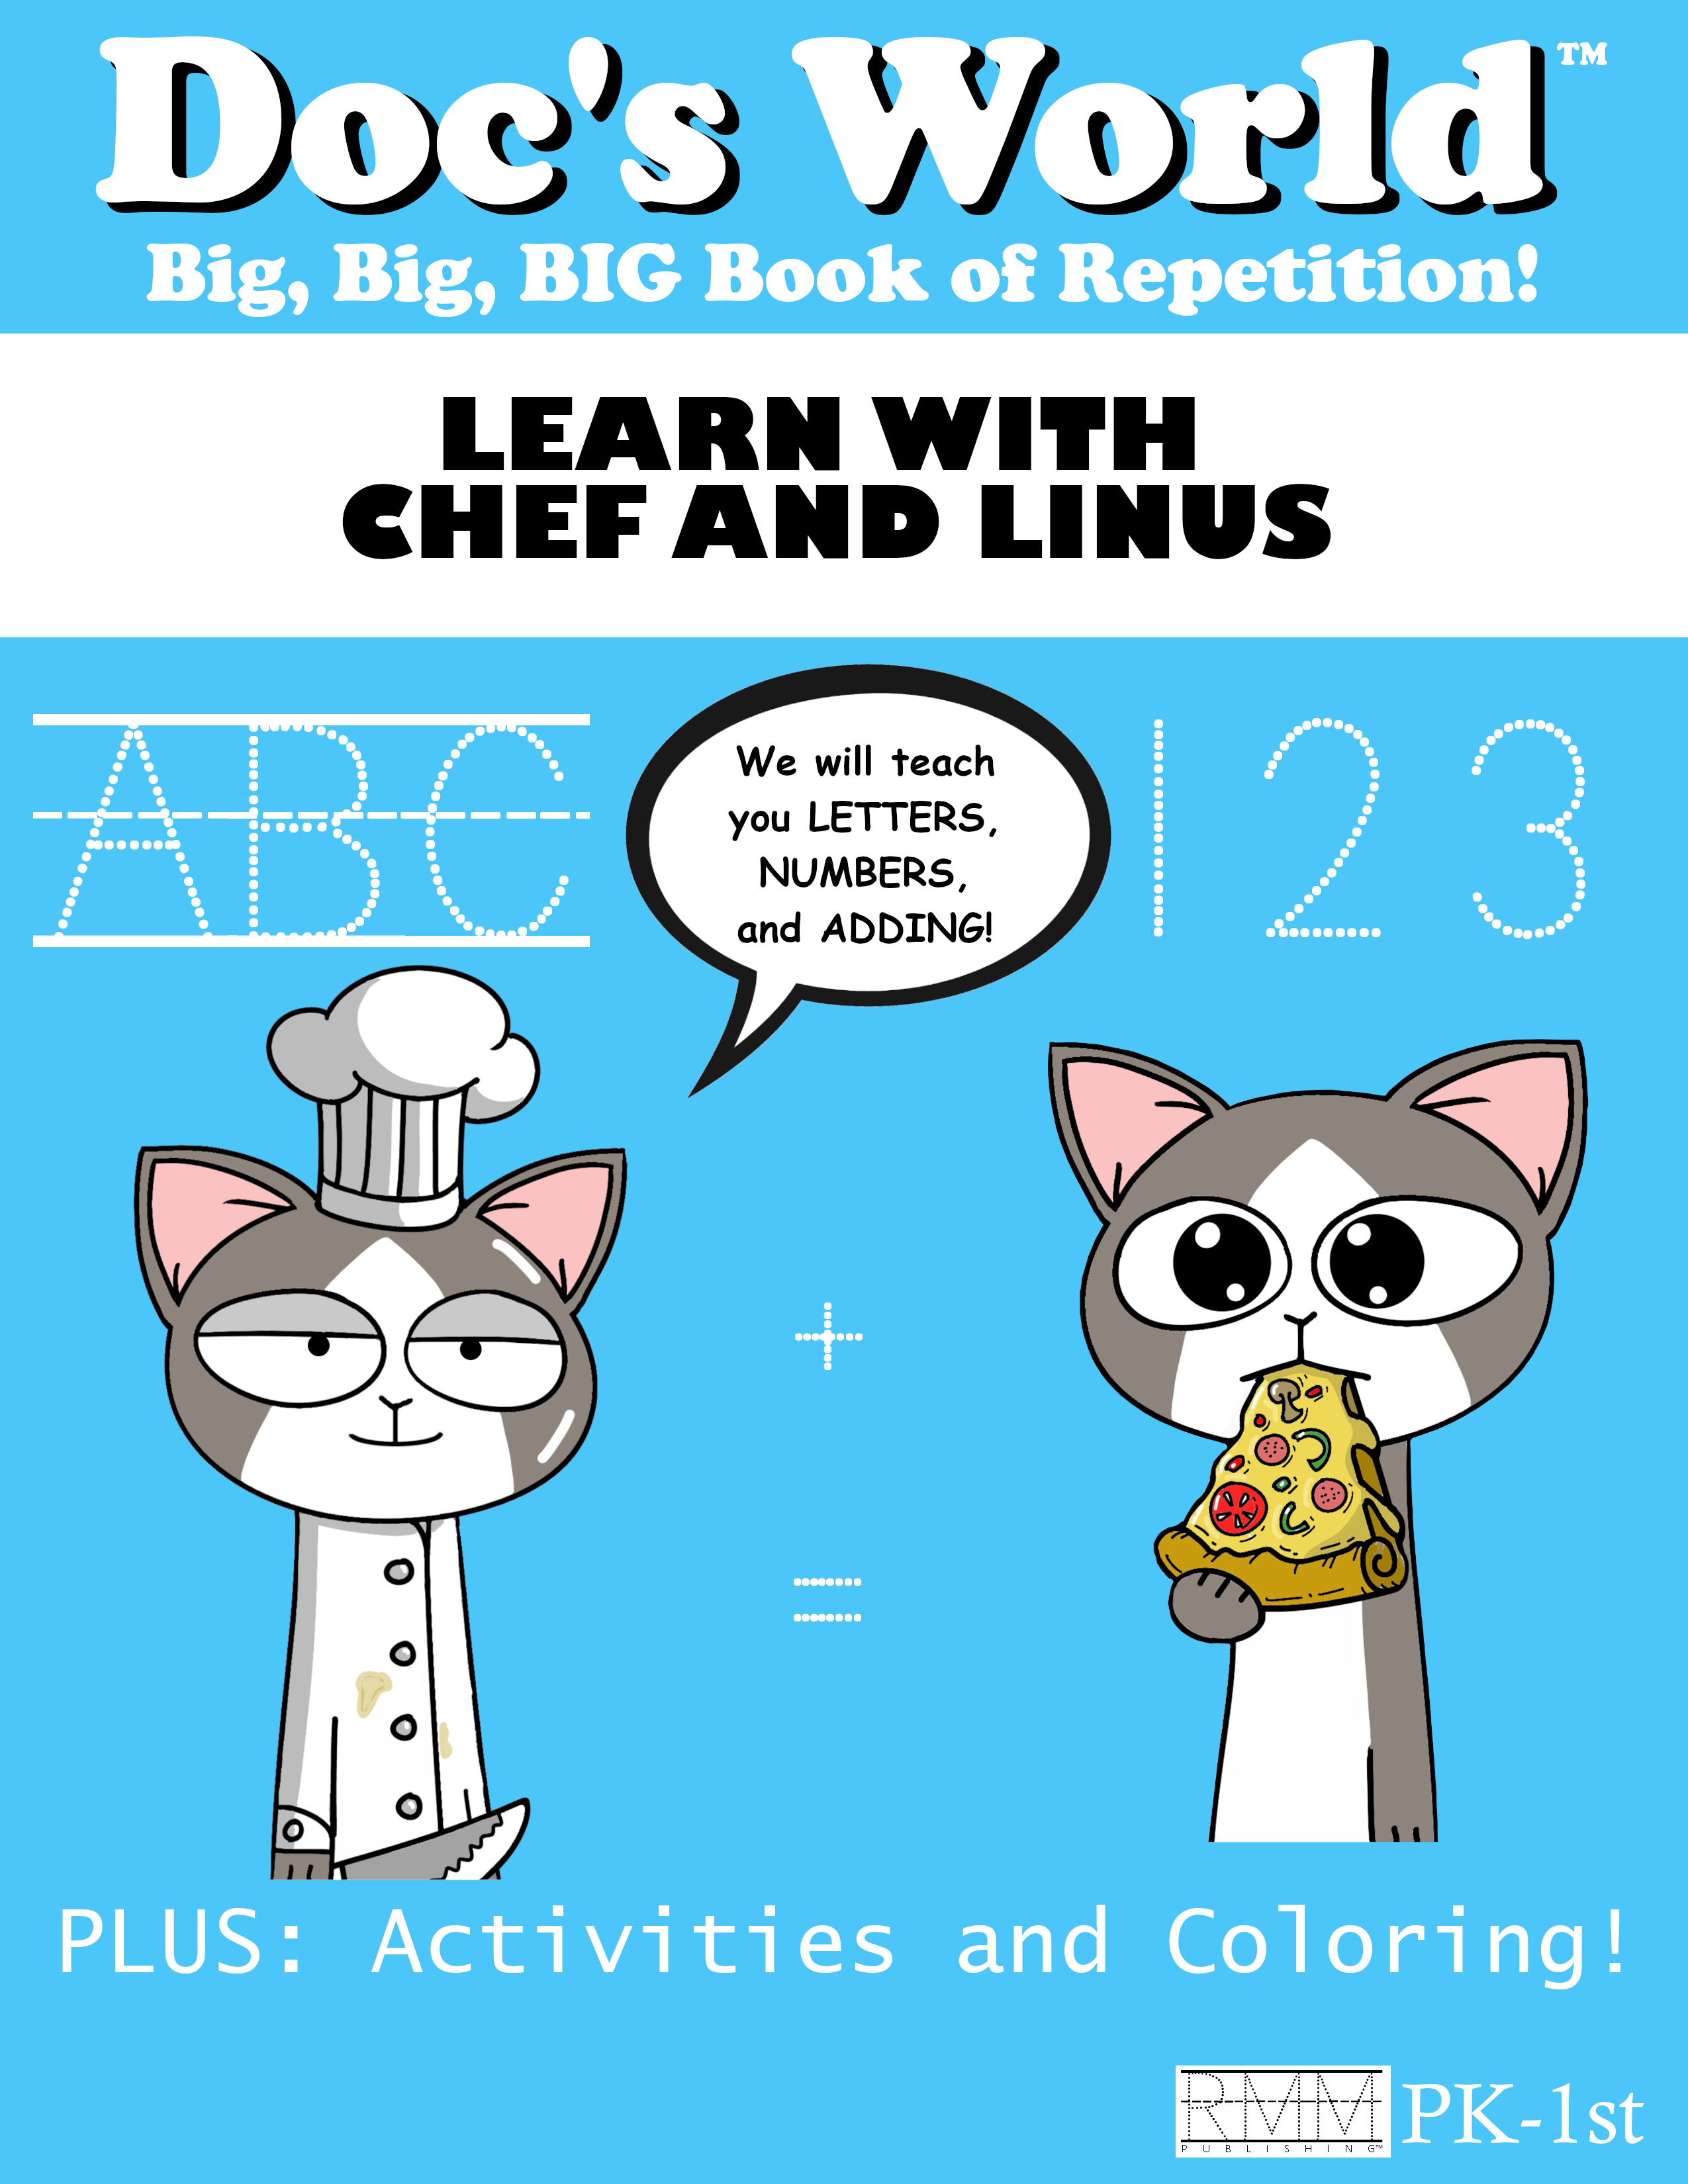 Chef and Linus Cover 1